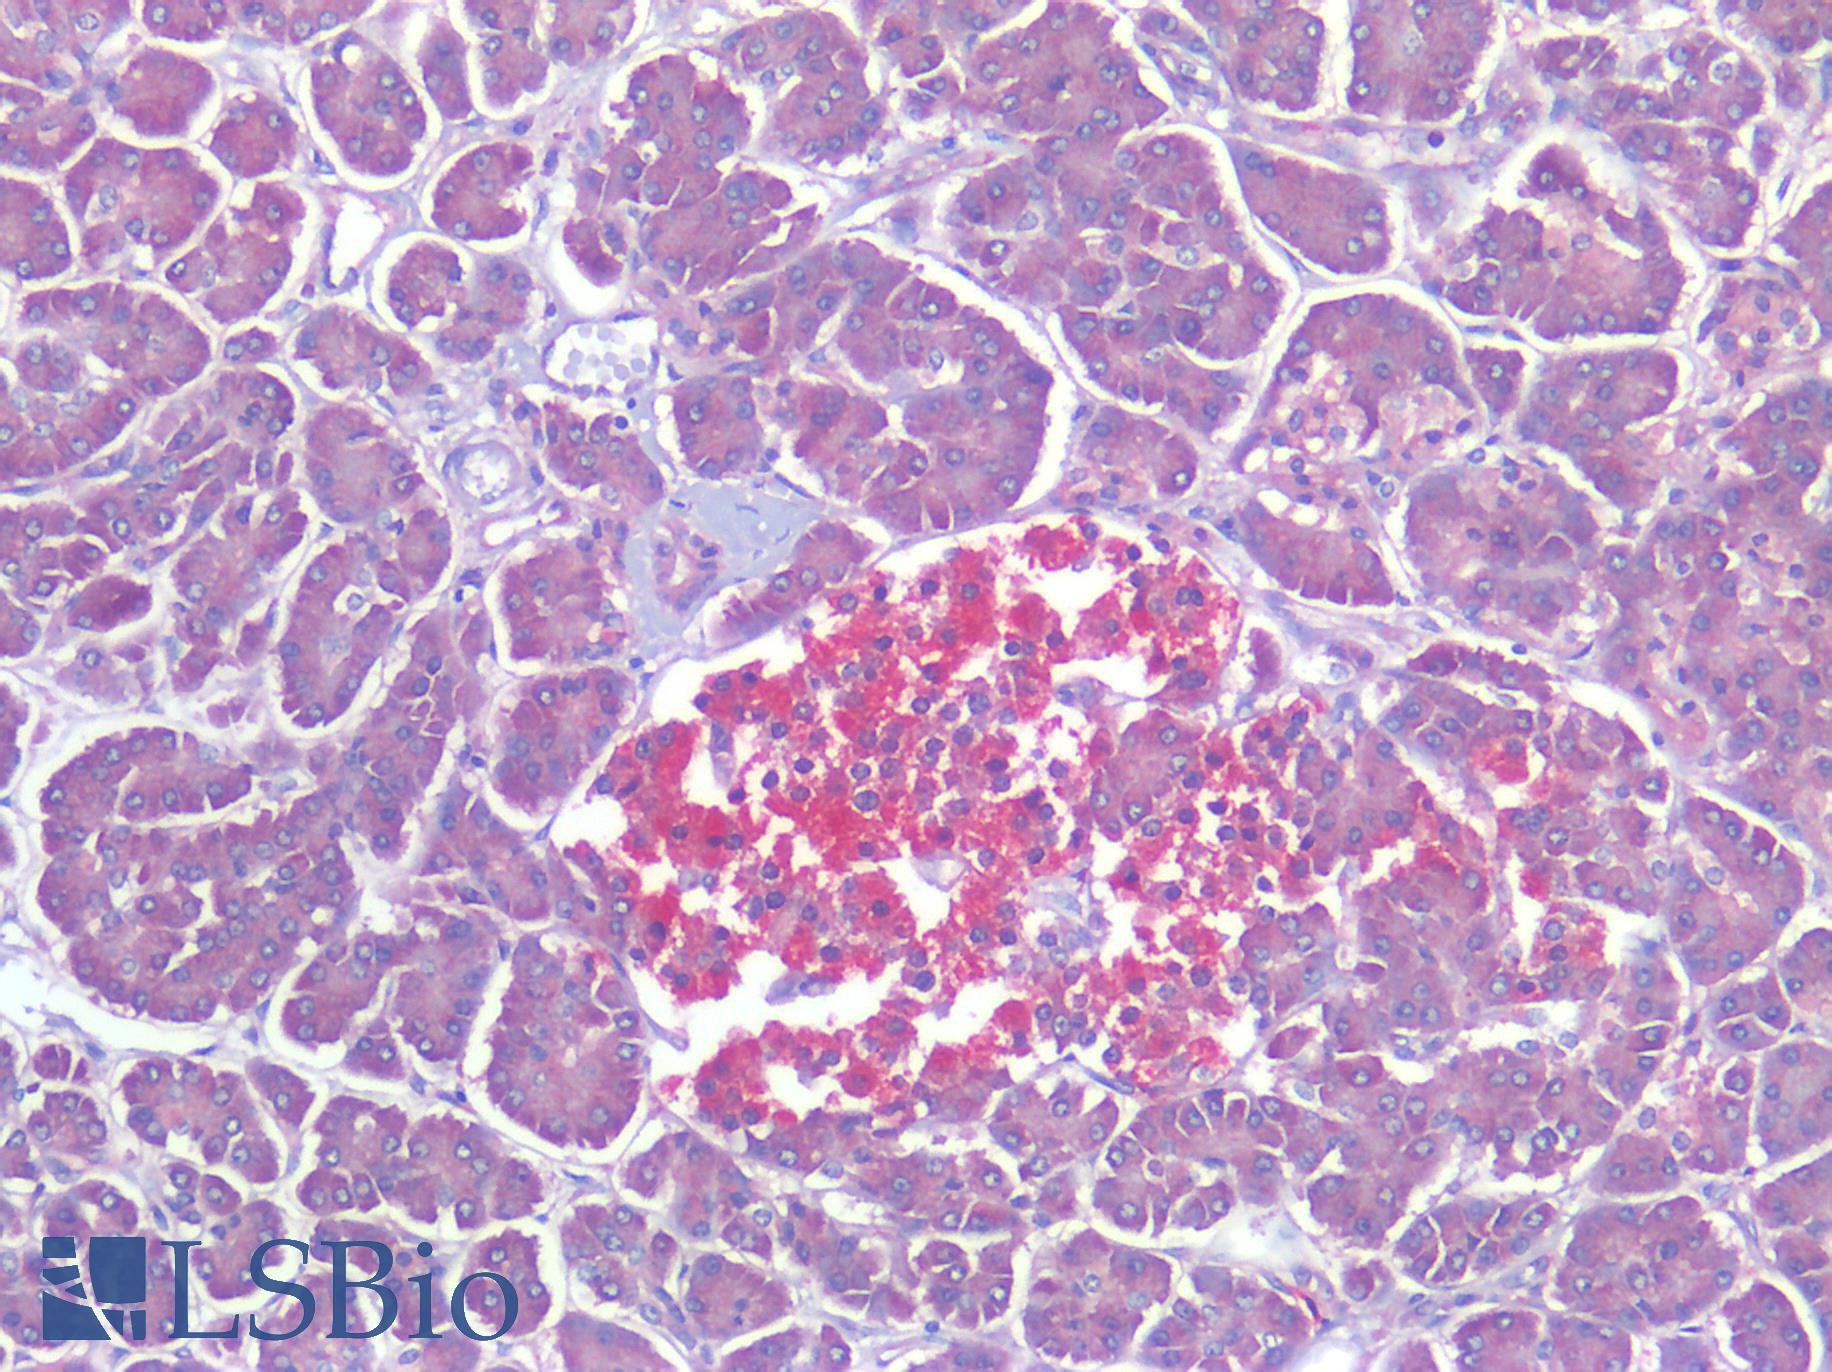 CALCRL / CGRP Receptor Antibody - Human Pancreas, Positive Staining In Islets of Langerhans, Positive Staining in Macrophages: Formalin-Fixed, Paraffin-Embedded (FFPE)